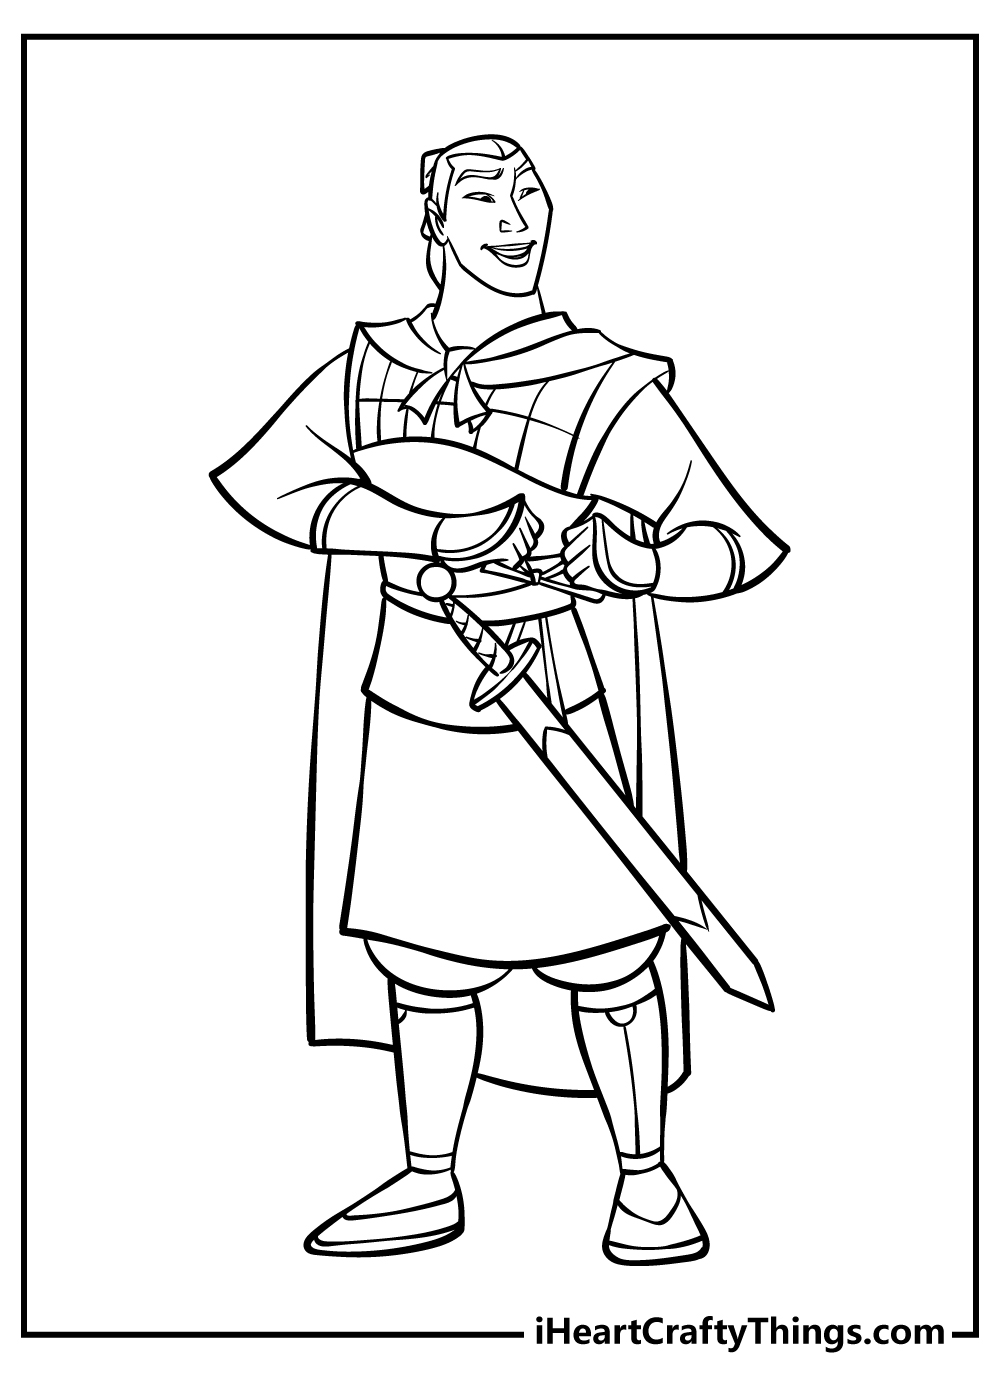 Mulan Easy Coloring Pages